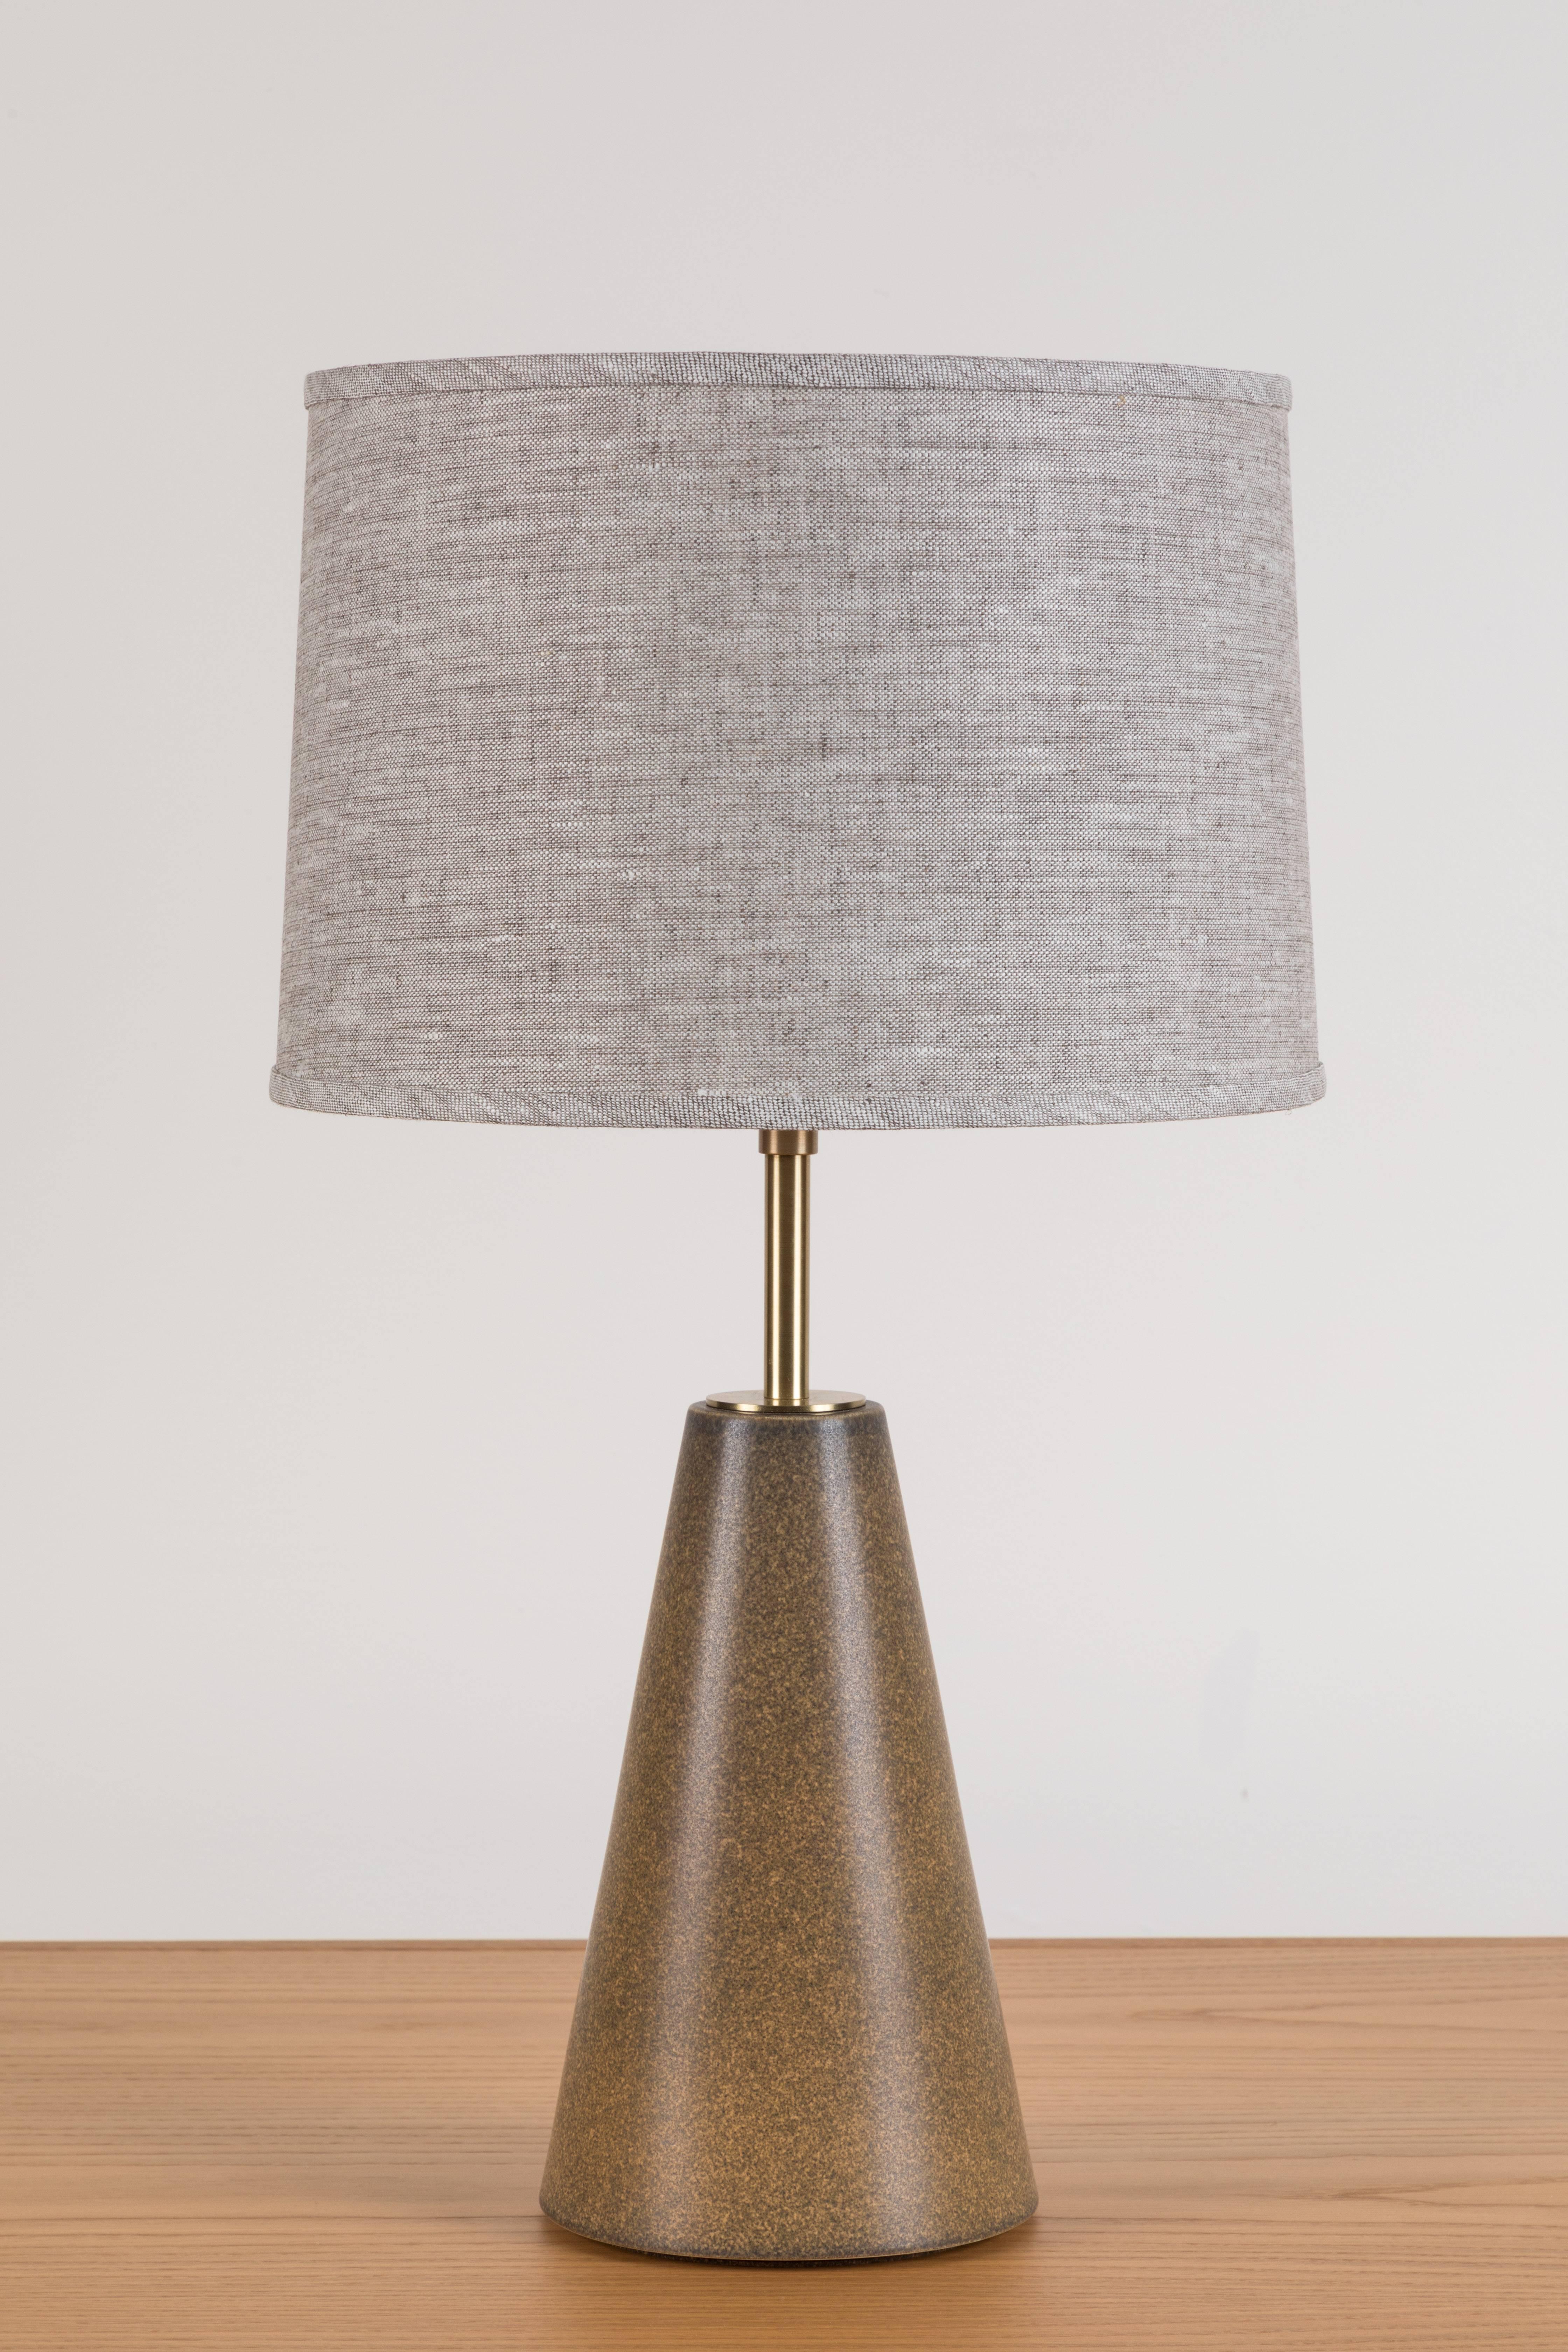 Pair of Gio lamps by Stone and Sawyer.

 